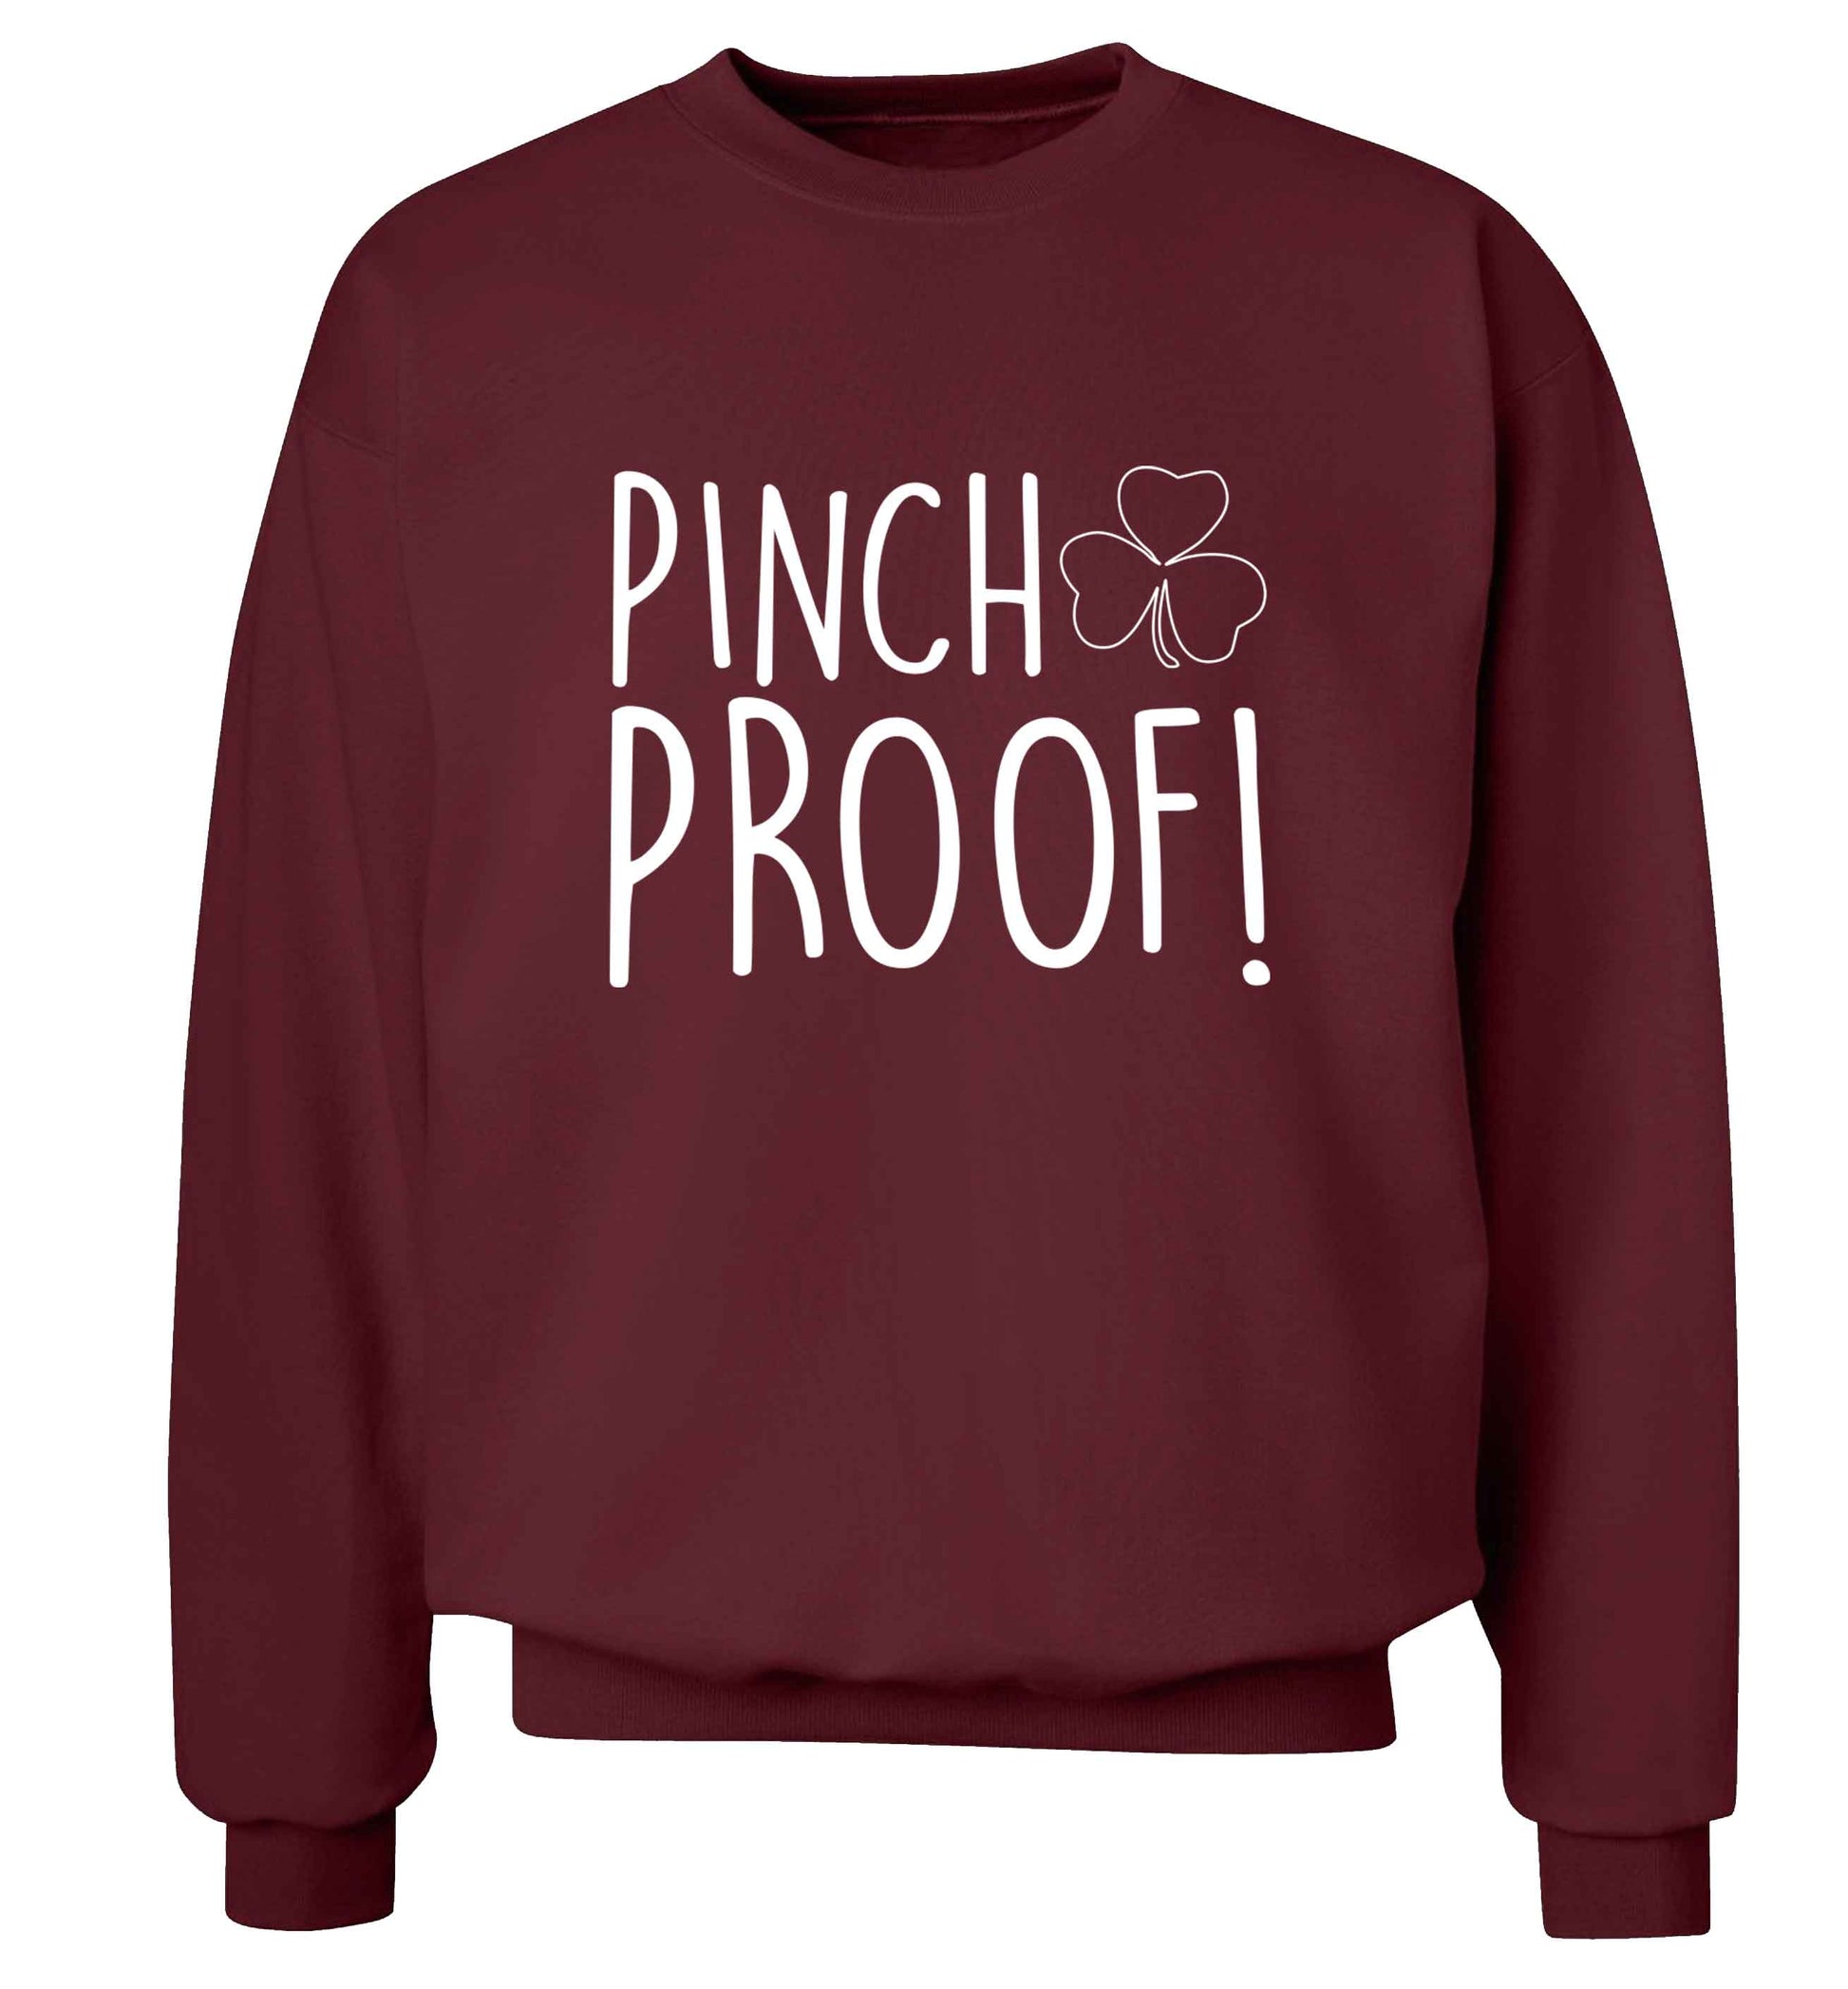 Pinch Proof adult's unisex maroon sweater 2XL